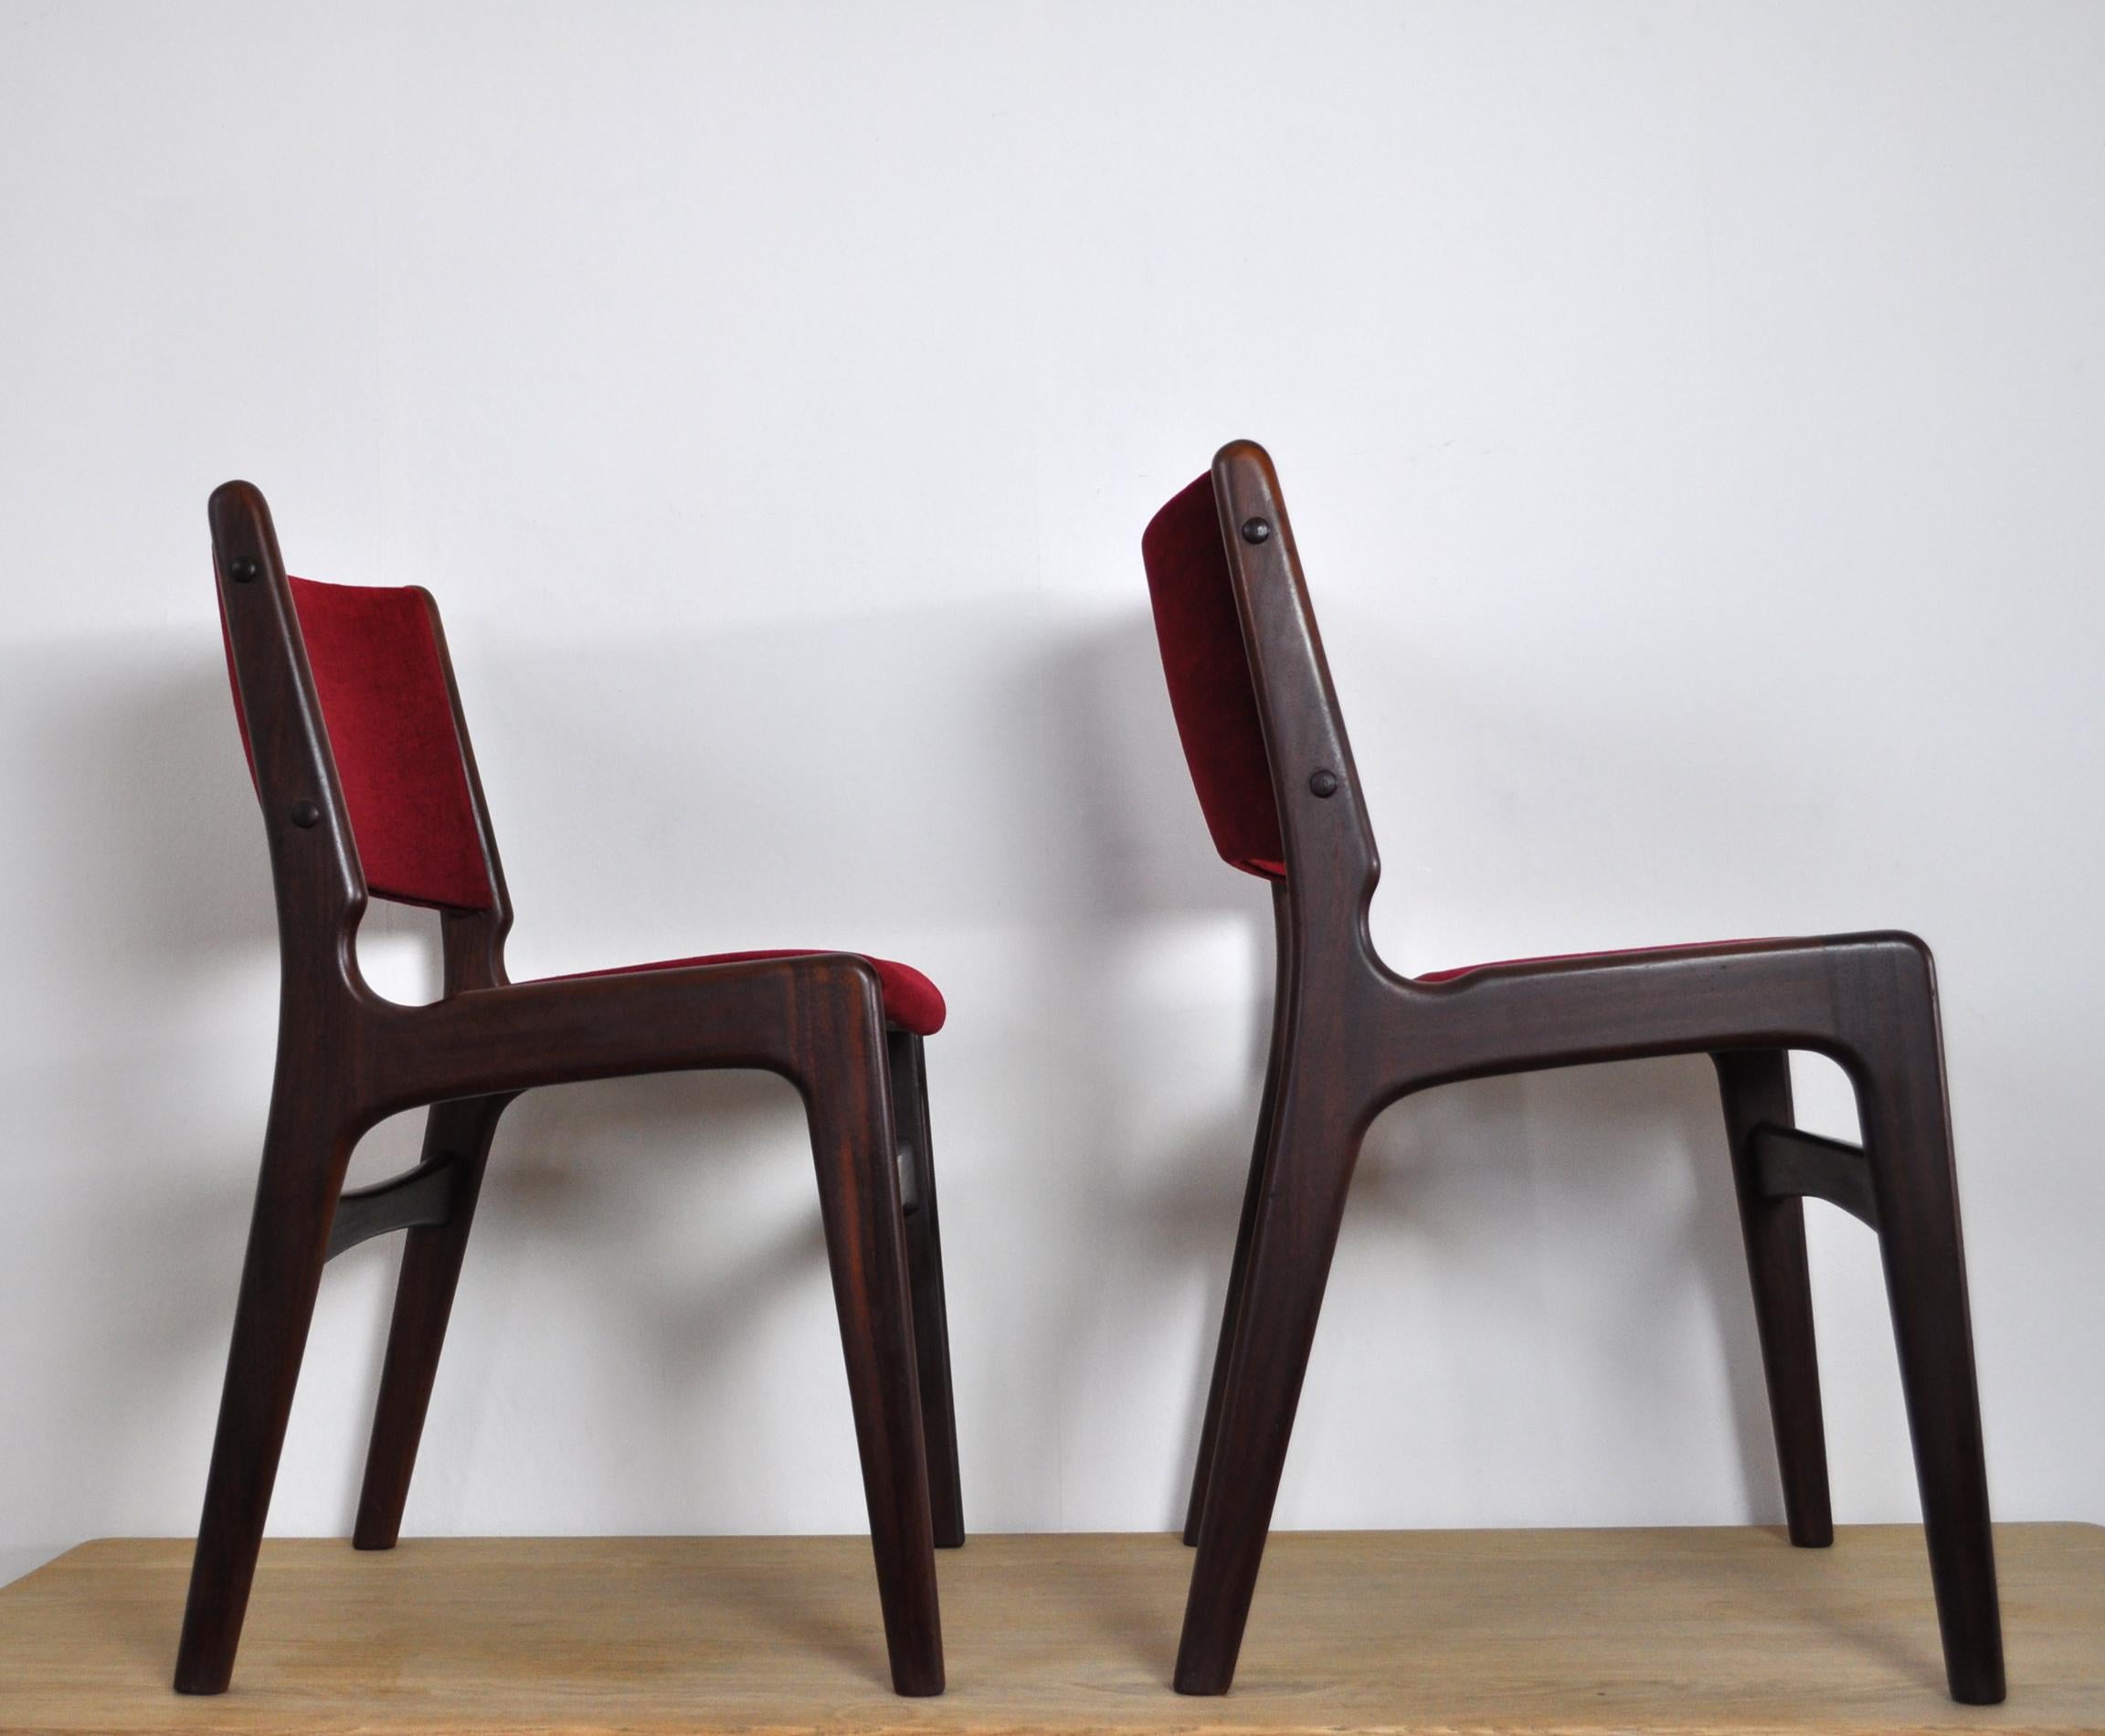 Set of two dining chairs designed by Erik Buch for Oddense Maskinsnedkeri.
Solid teak frames with fabric upholstered seats and backs in a good condition.
 